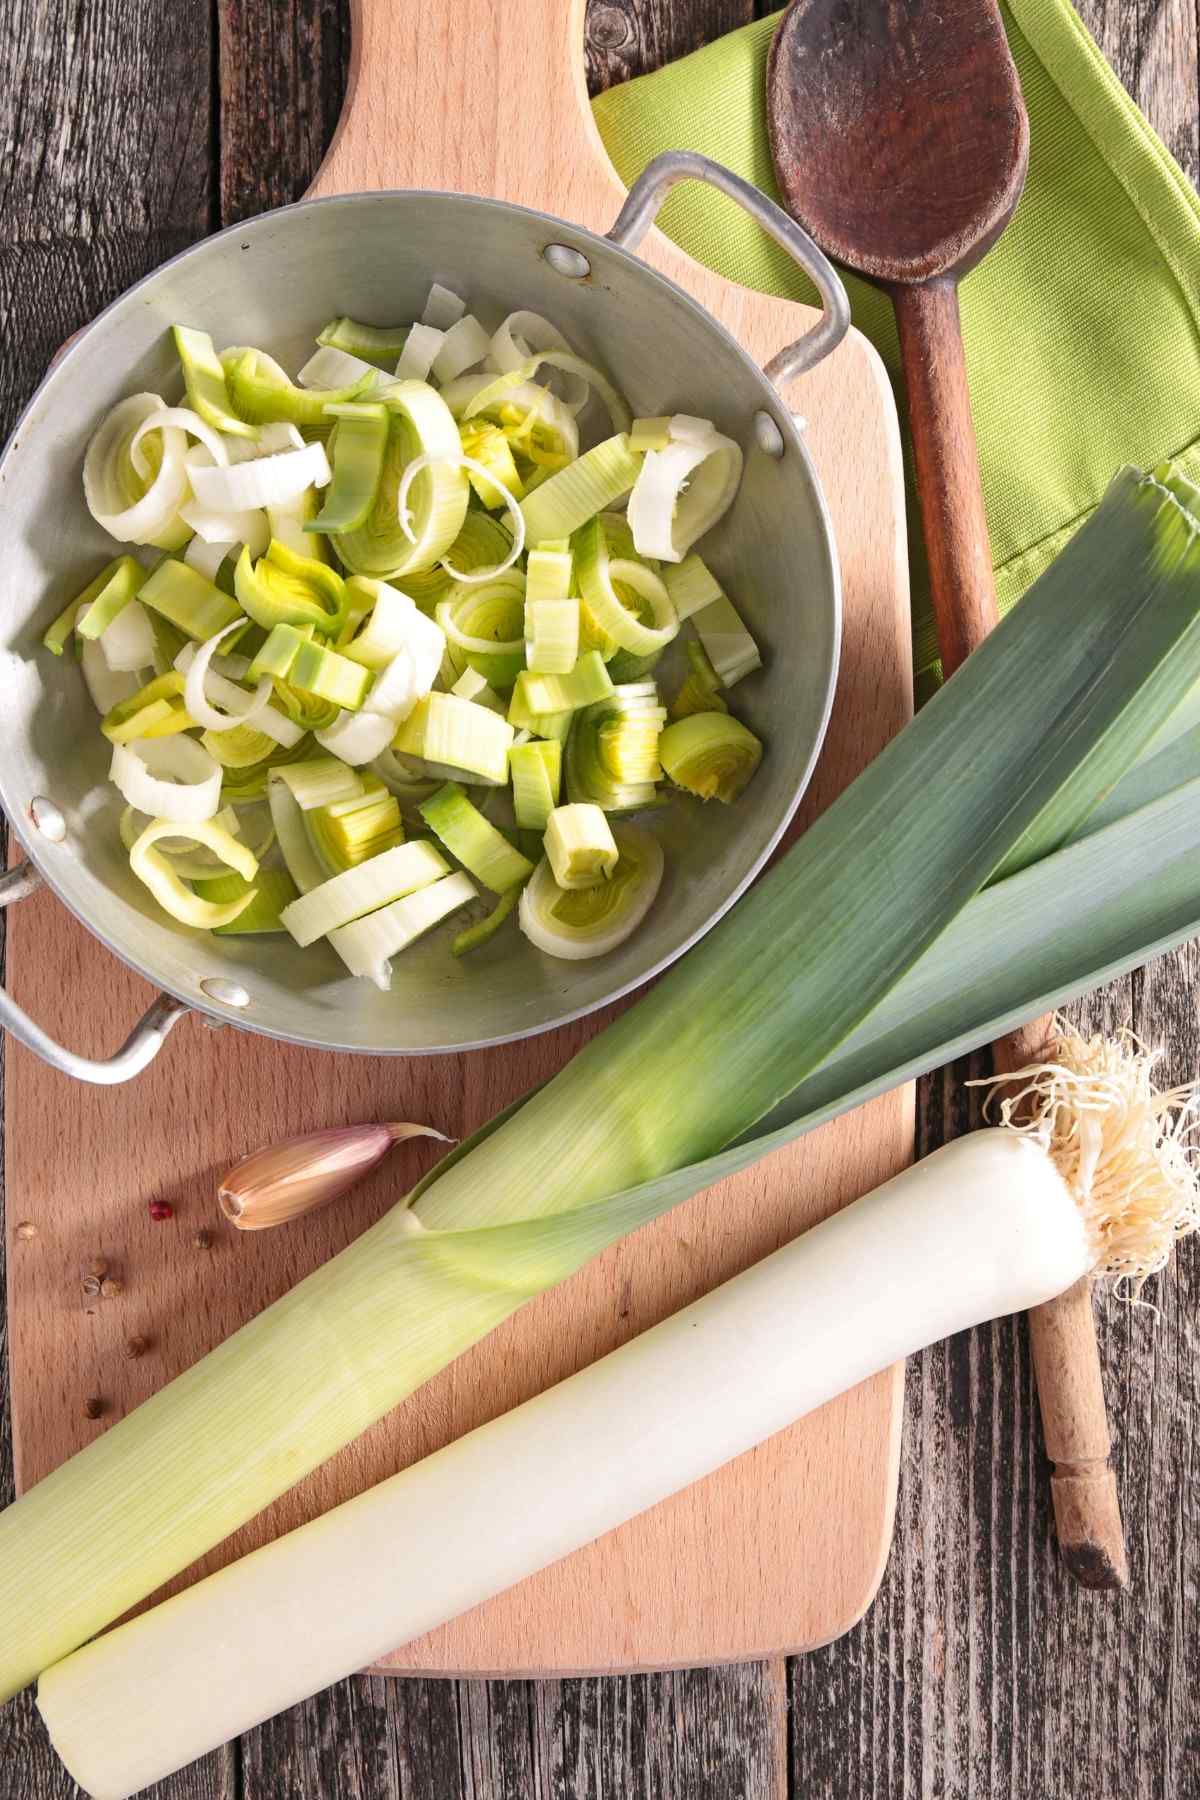 From potato leek soup to roasted leek to leek pasta, these 15 Best Leek Recipes will give you plenty of choices. Also learn how to cut, how to cook, and what else you can make with leeks. You'll be able to walk away saying you're a leek pro!